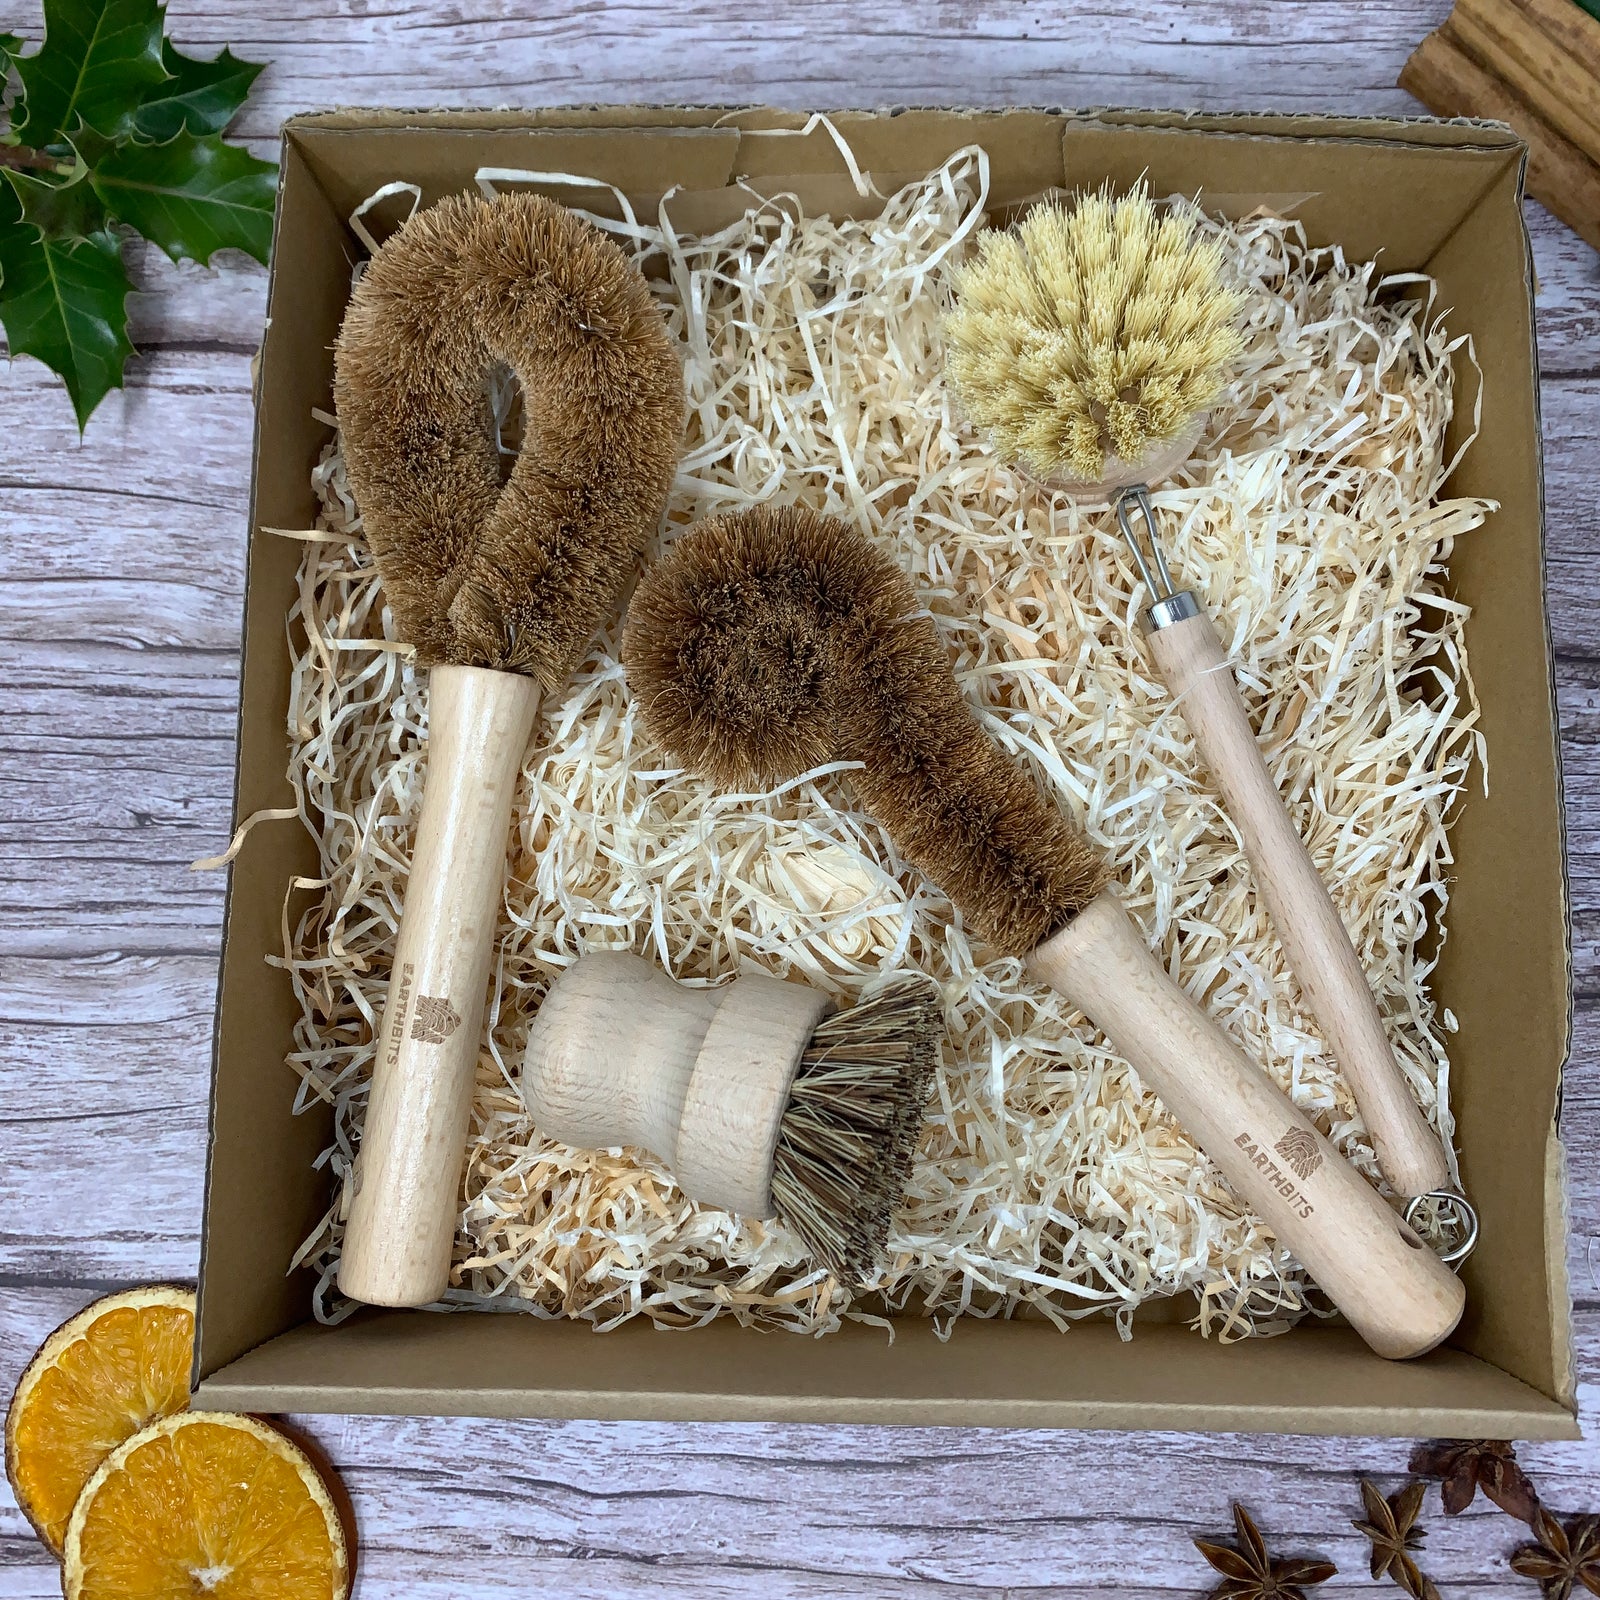 Wooden Dish Brushes for cleaning pots, pans and bottles